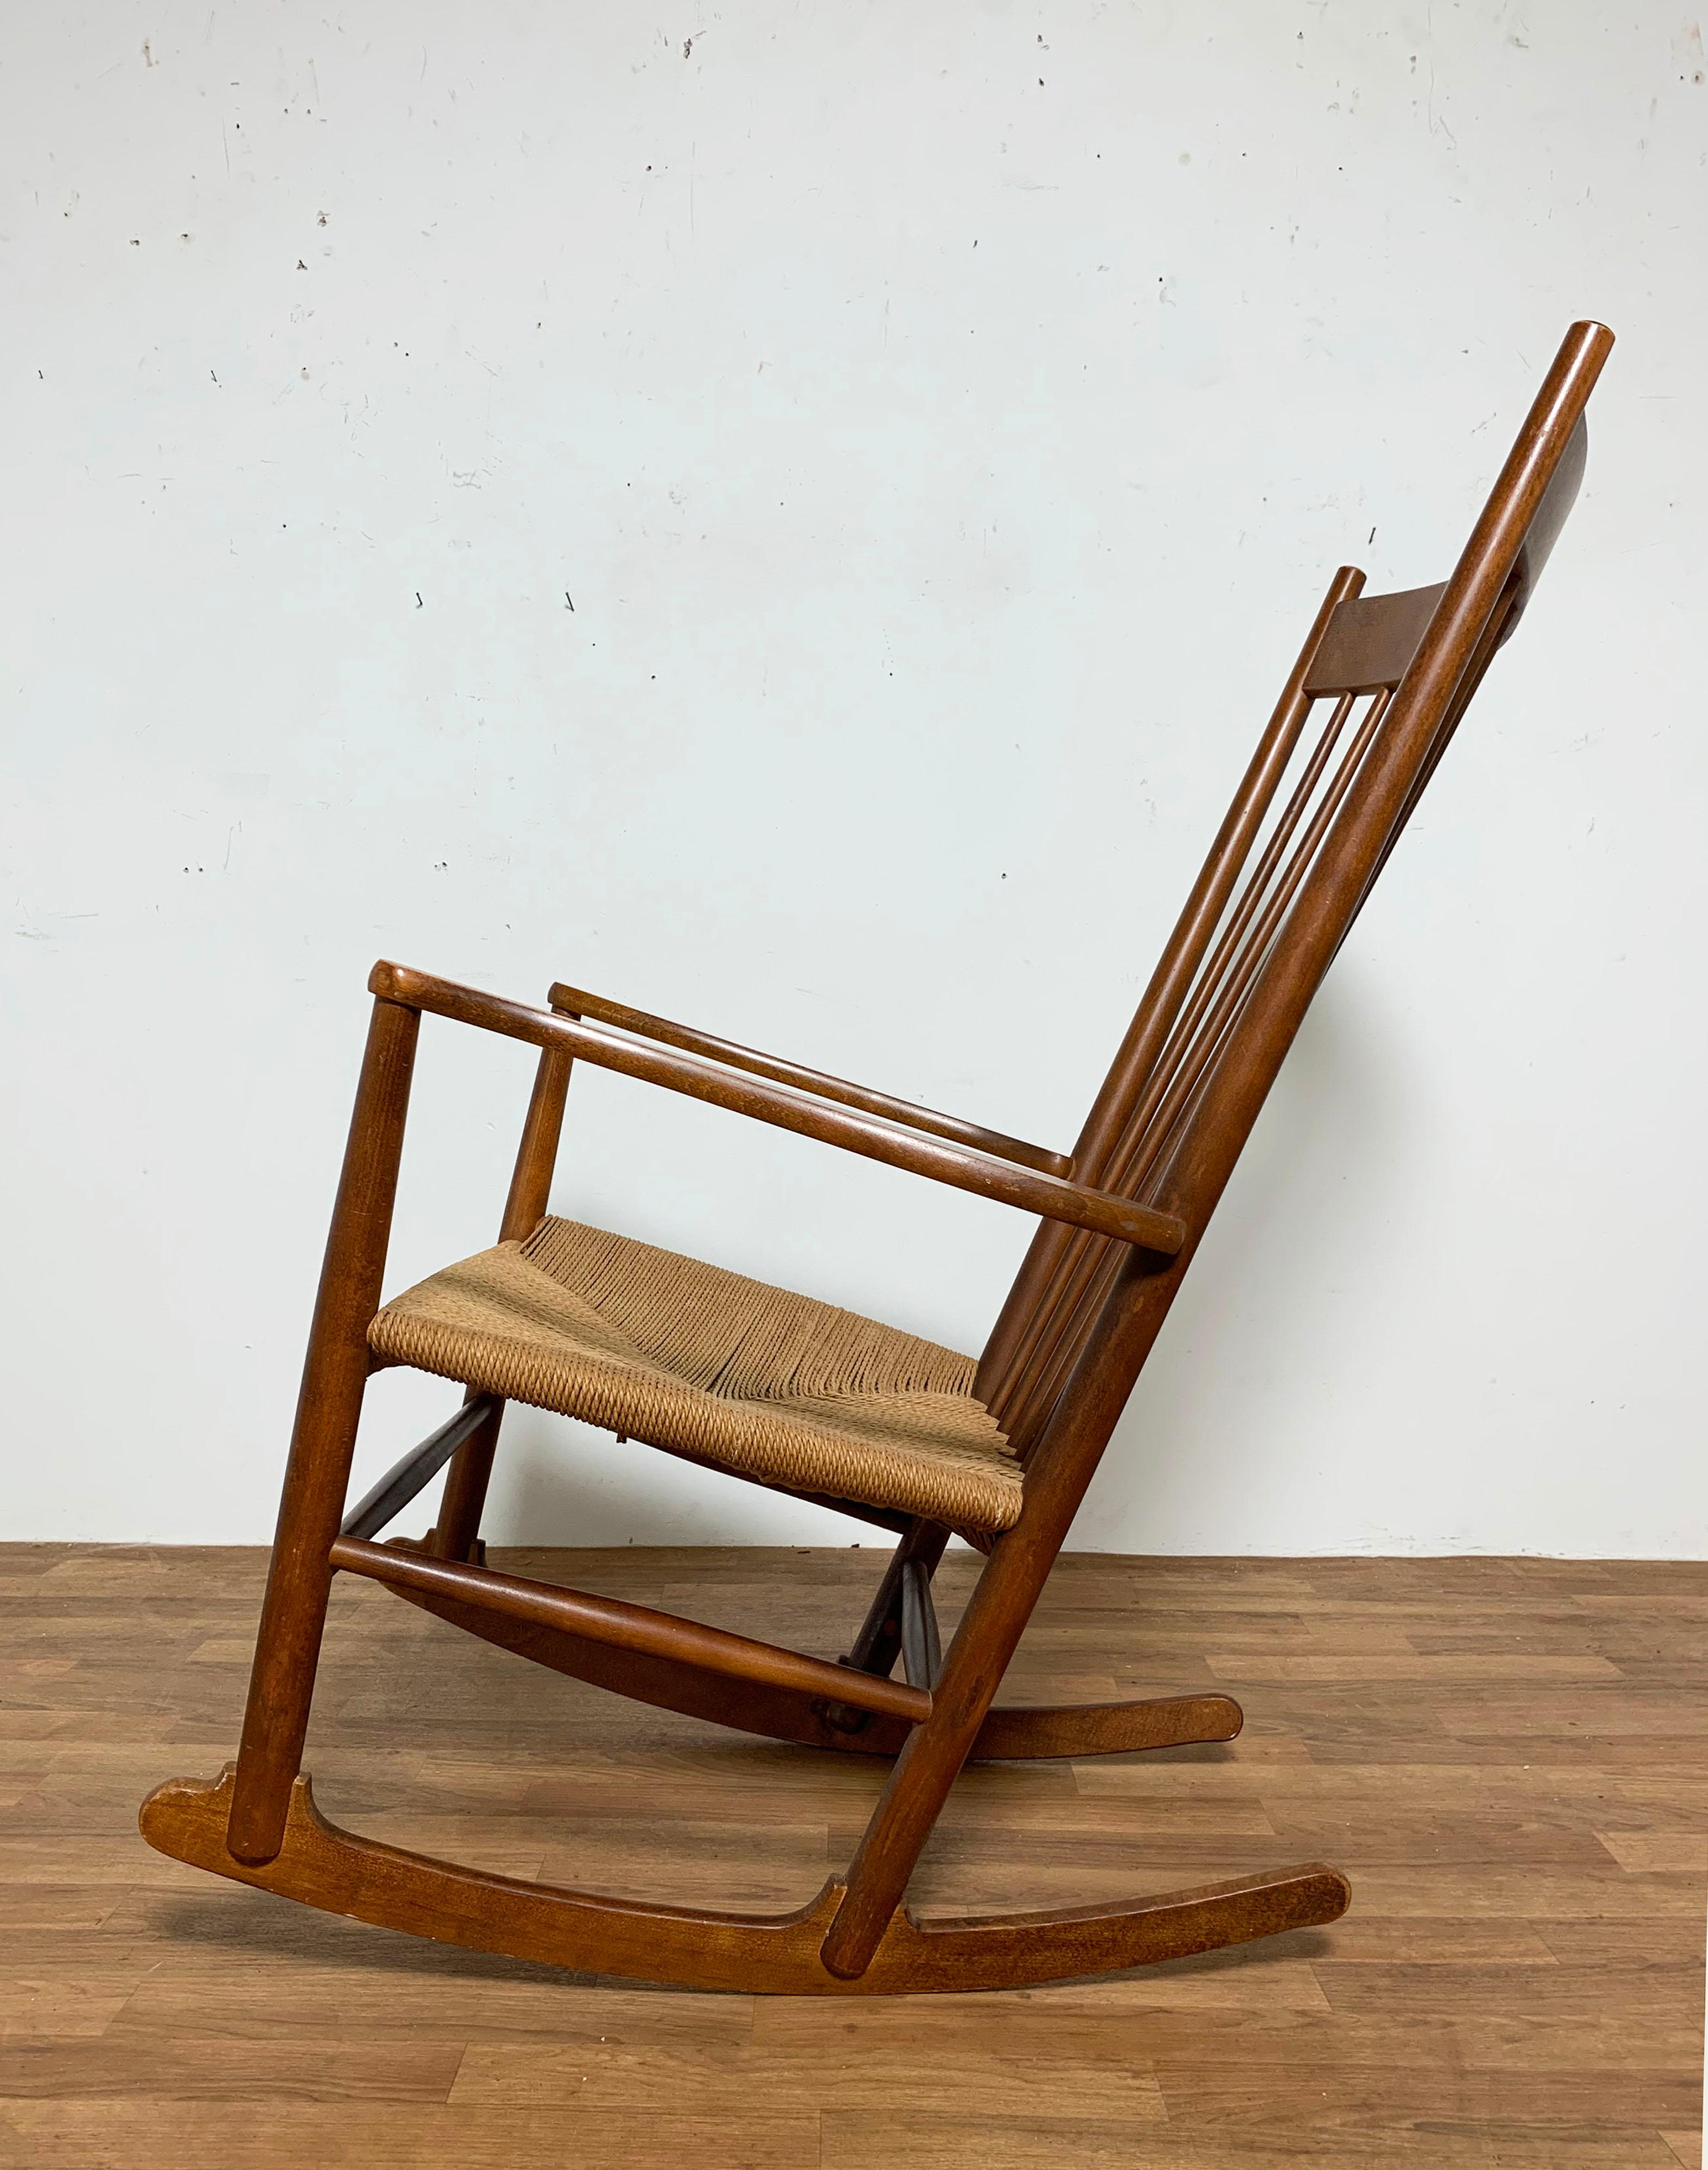 Hans Wegner “J16” rocker with corded seat for FDB Mobler, Denmark. Created in 1944, this has been one of Wegner’s most widely recognized designs. Marked with a production date of 1983.